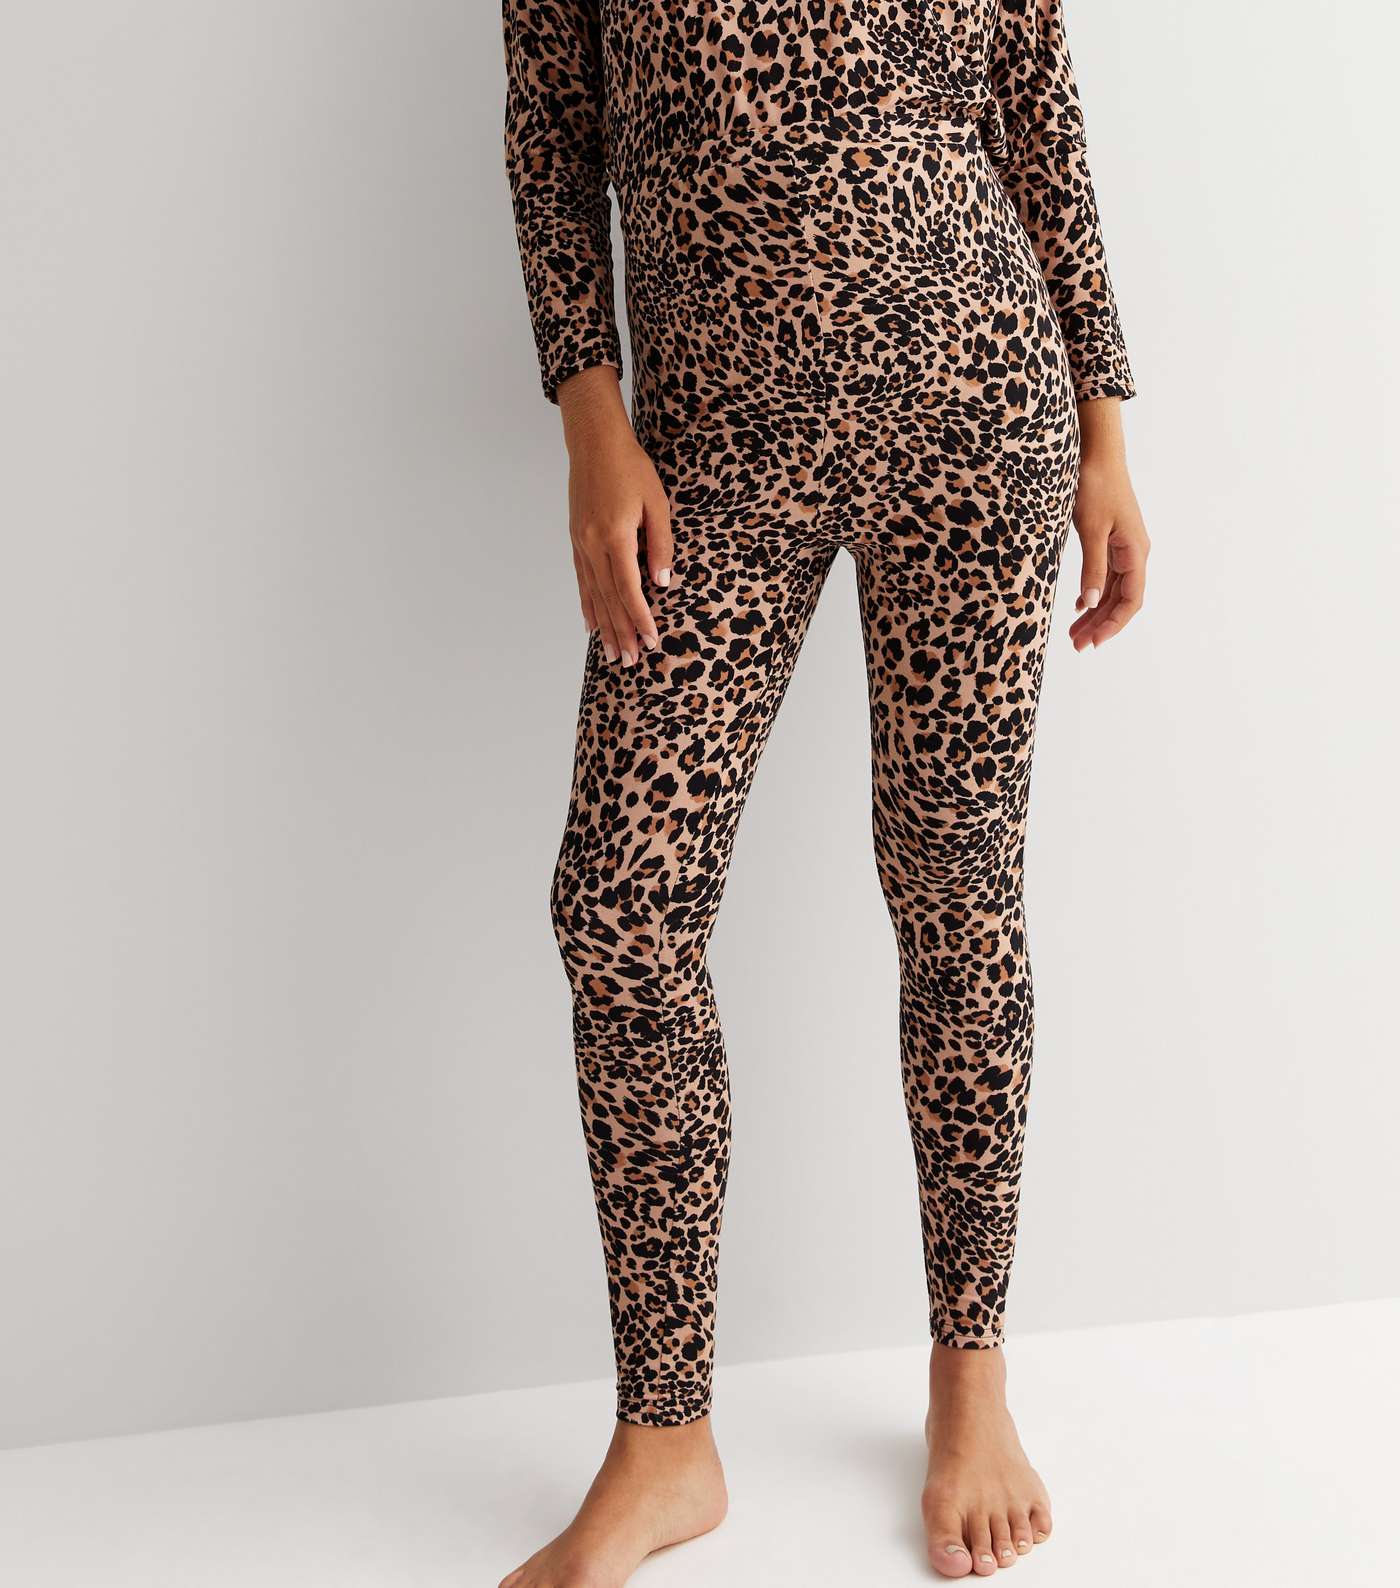 Maternity Brown Soft Touch Legging Pyjama Set with Leopard Print Image 3